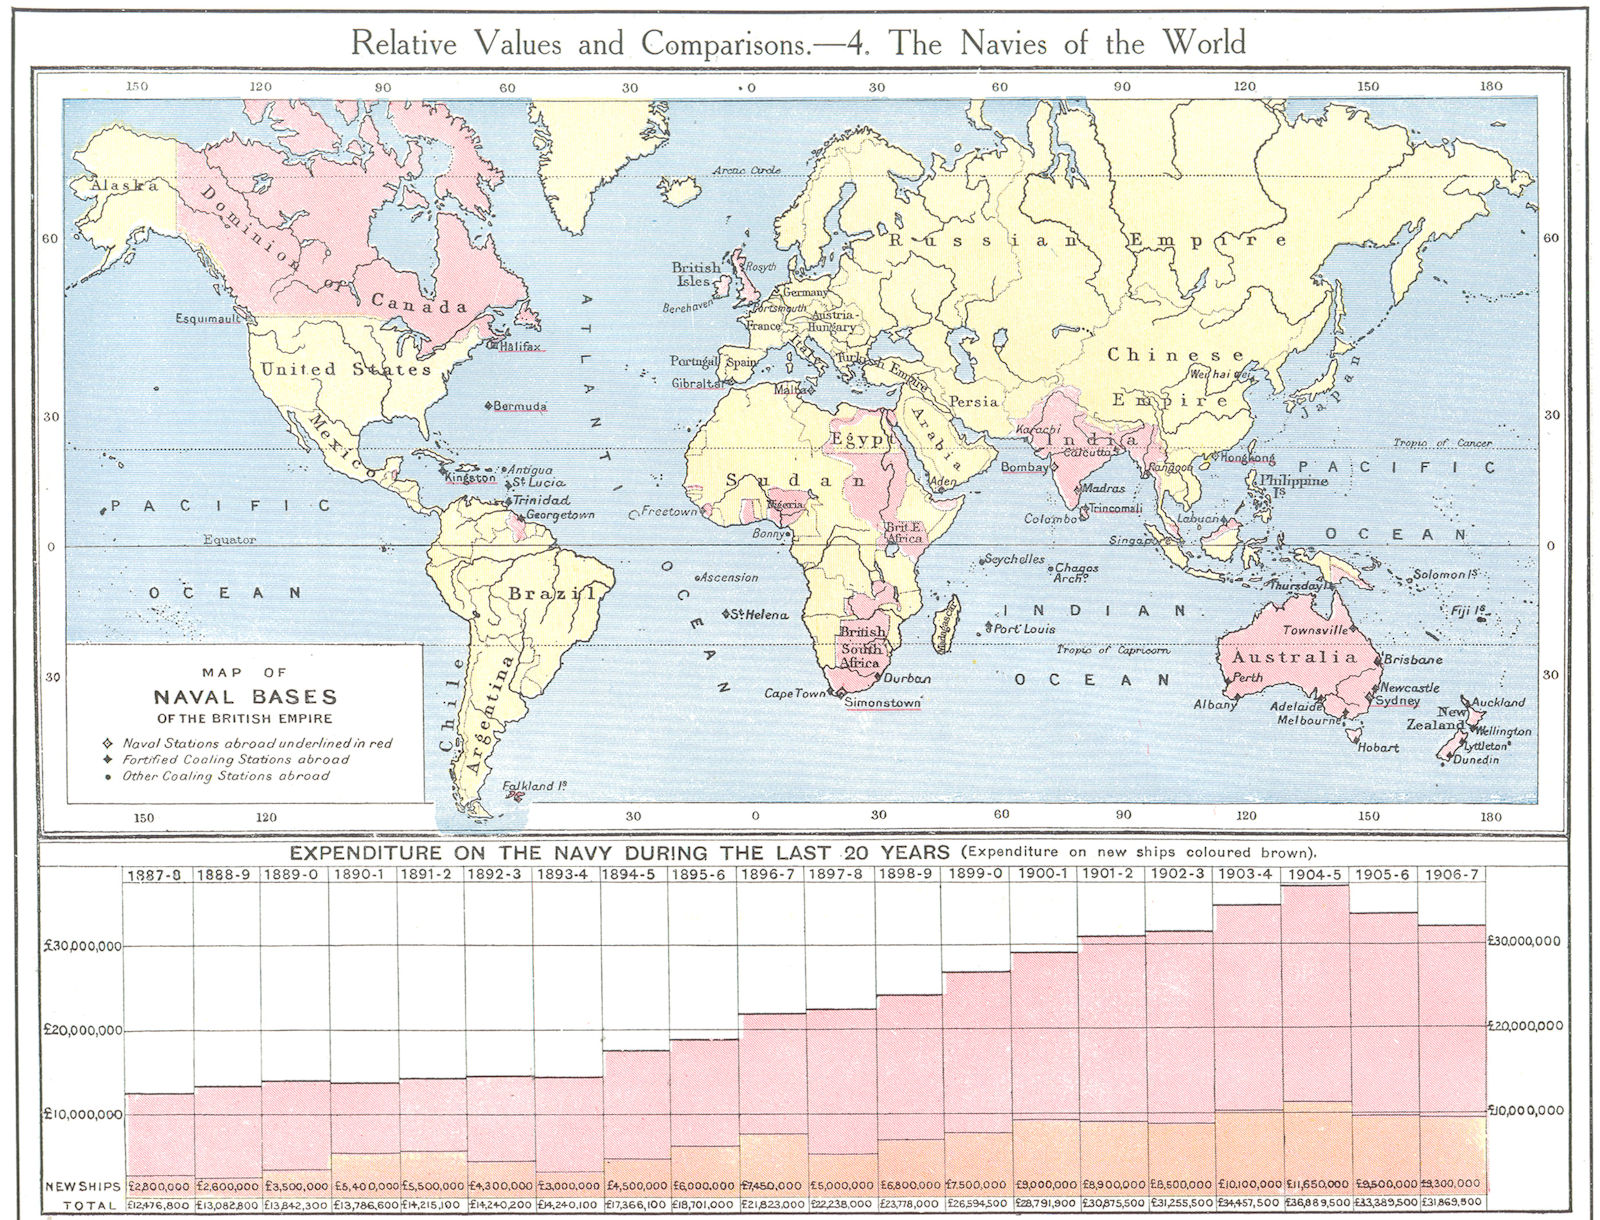 BRITISH EMPIRE. Map of Naval bases.Expenditure.Royal Navy cf other navies 1907